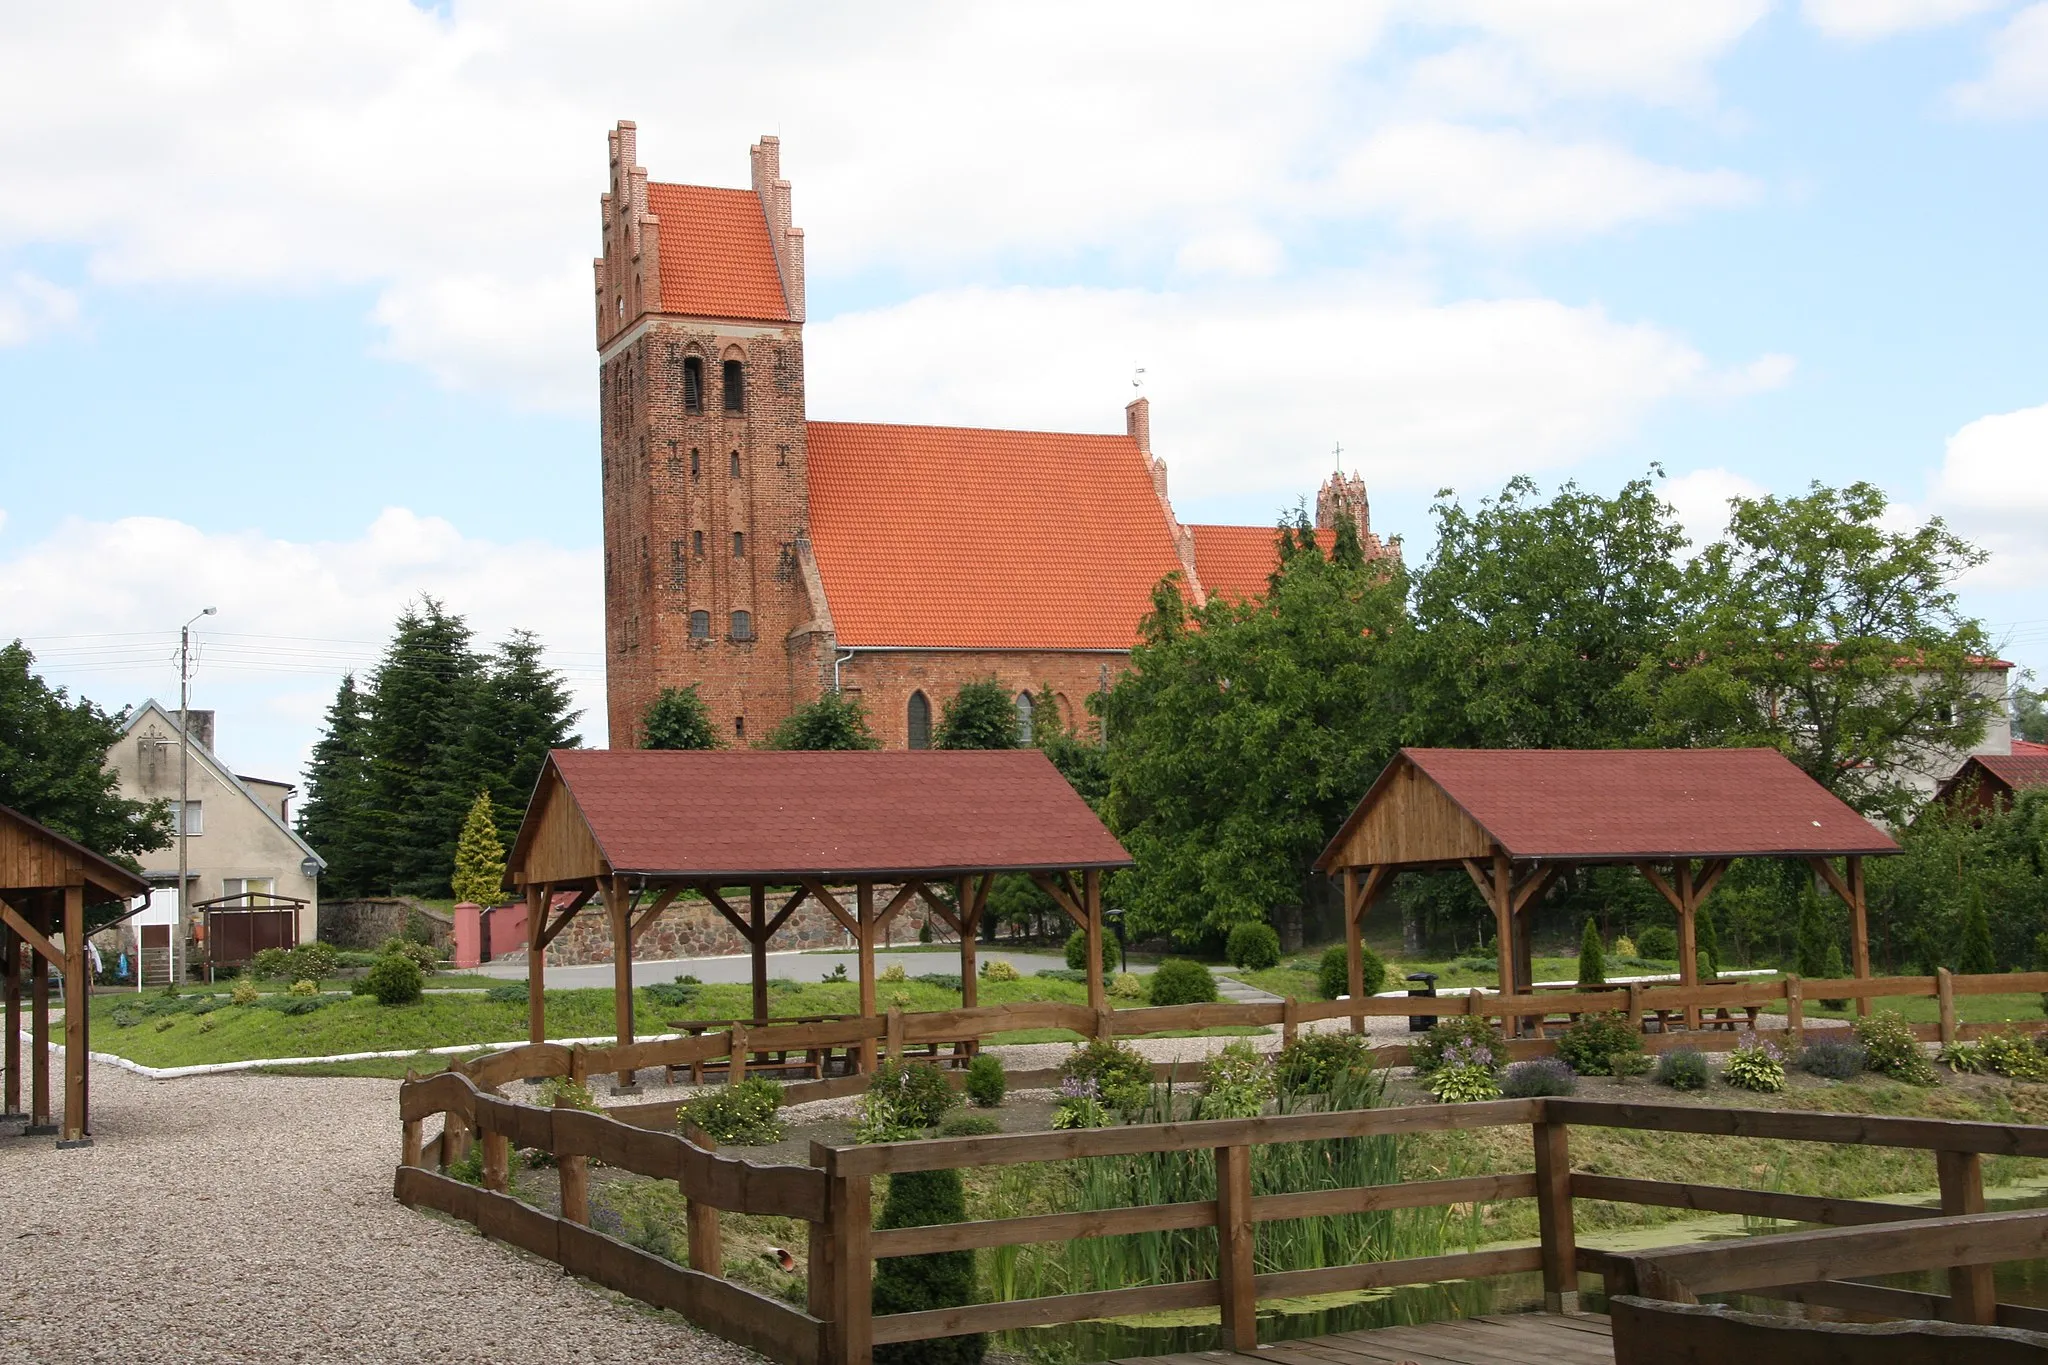 Photo showing: Church building in the village of Lalkowy, Starogard County in the Pomeranian Voivodeship of northern Poland.